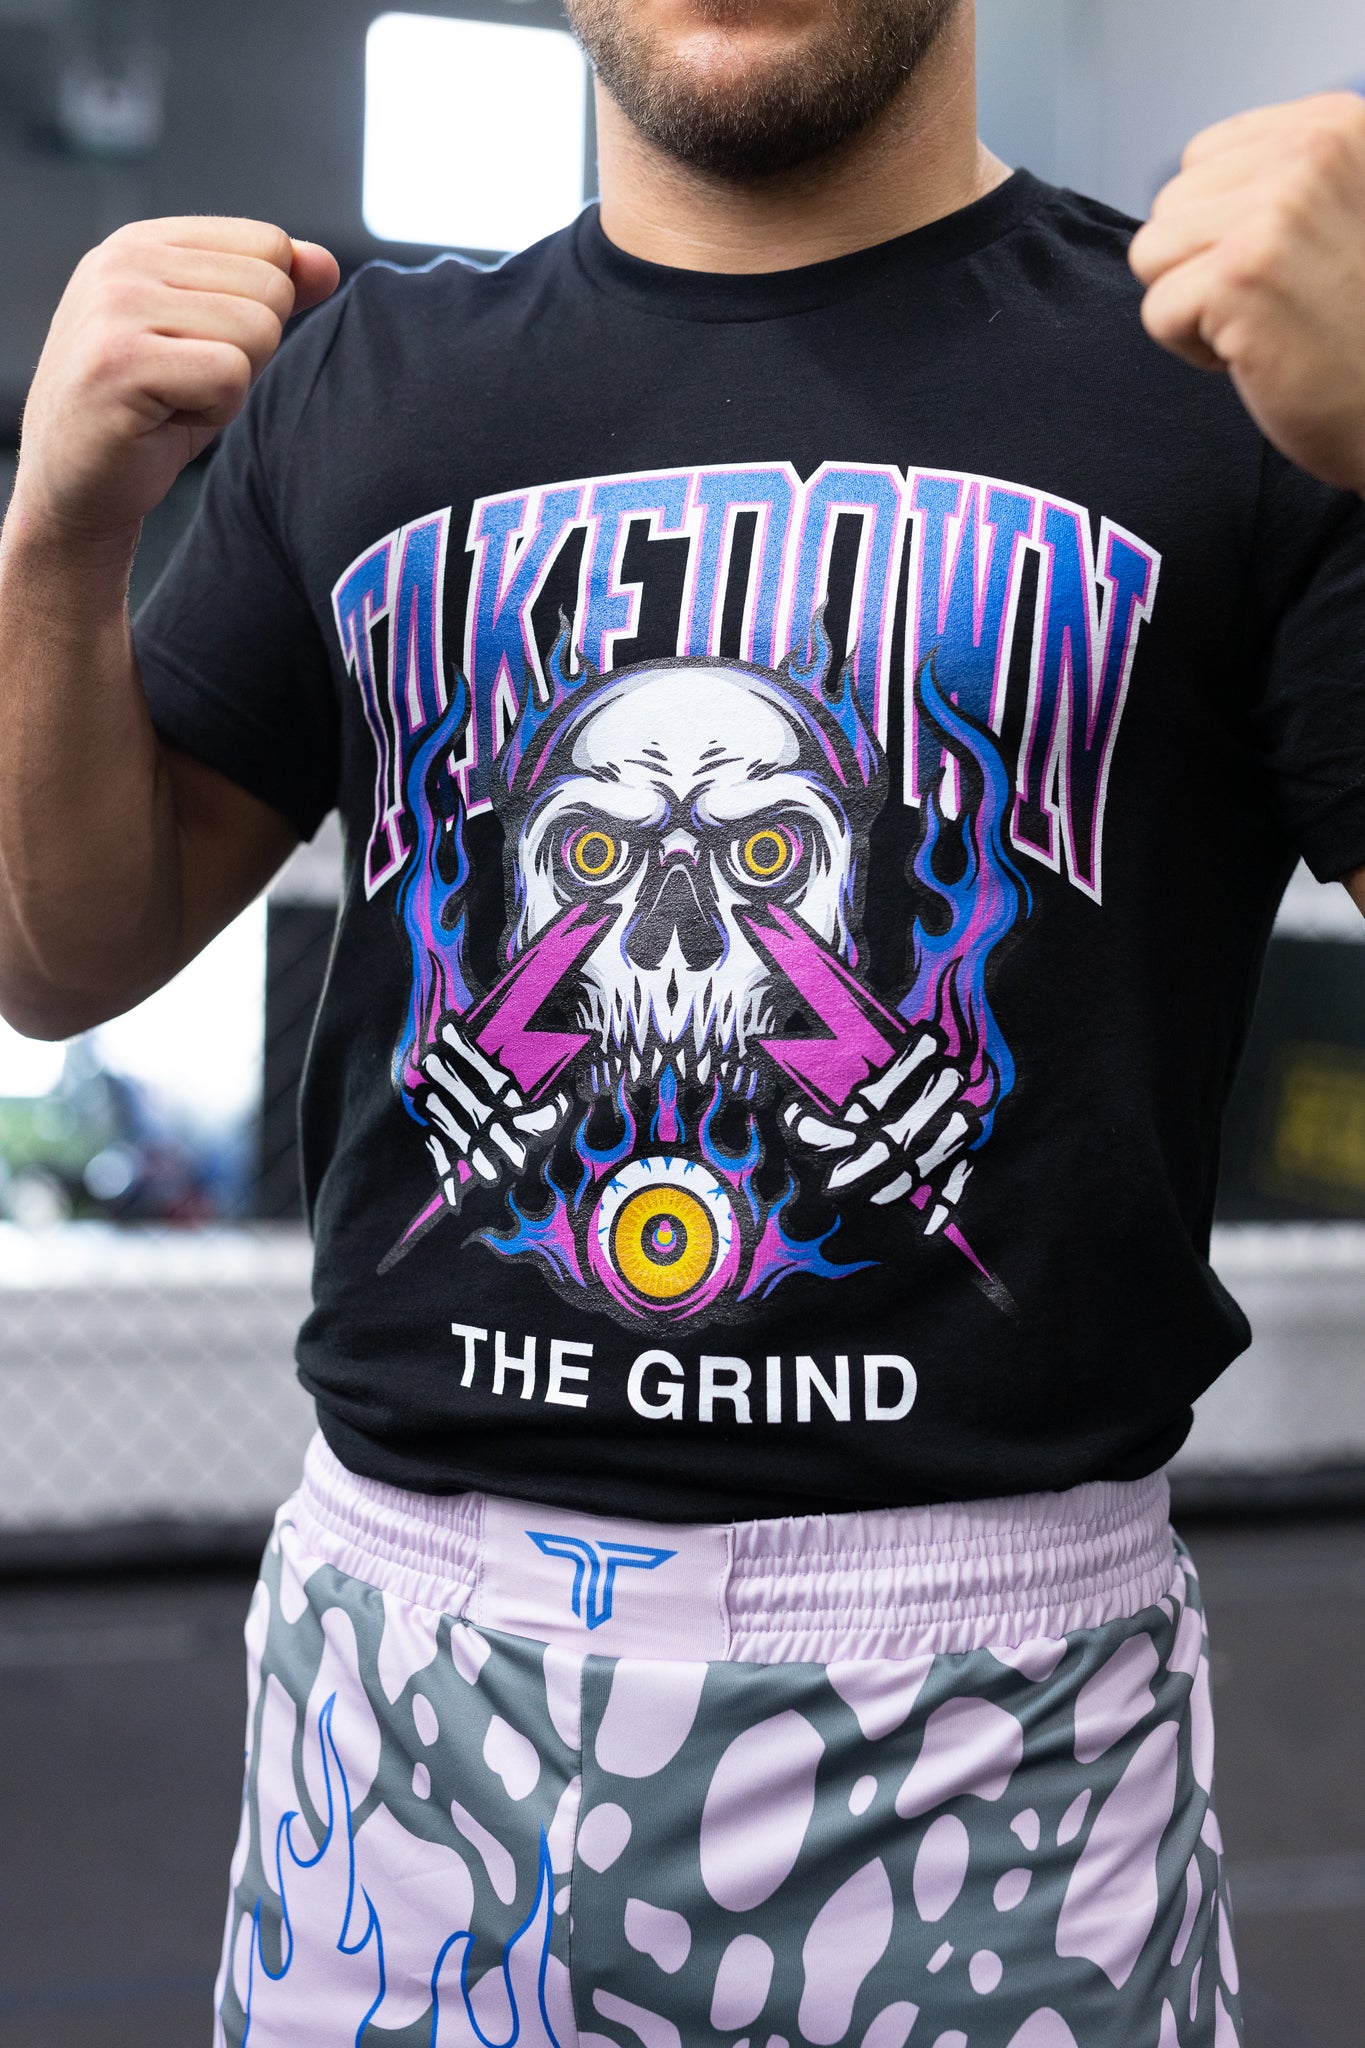 The Grind Graphic T-Shirt